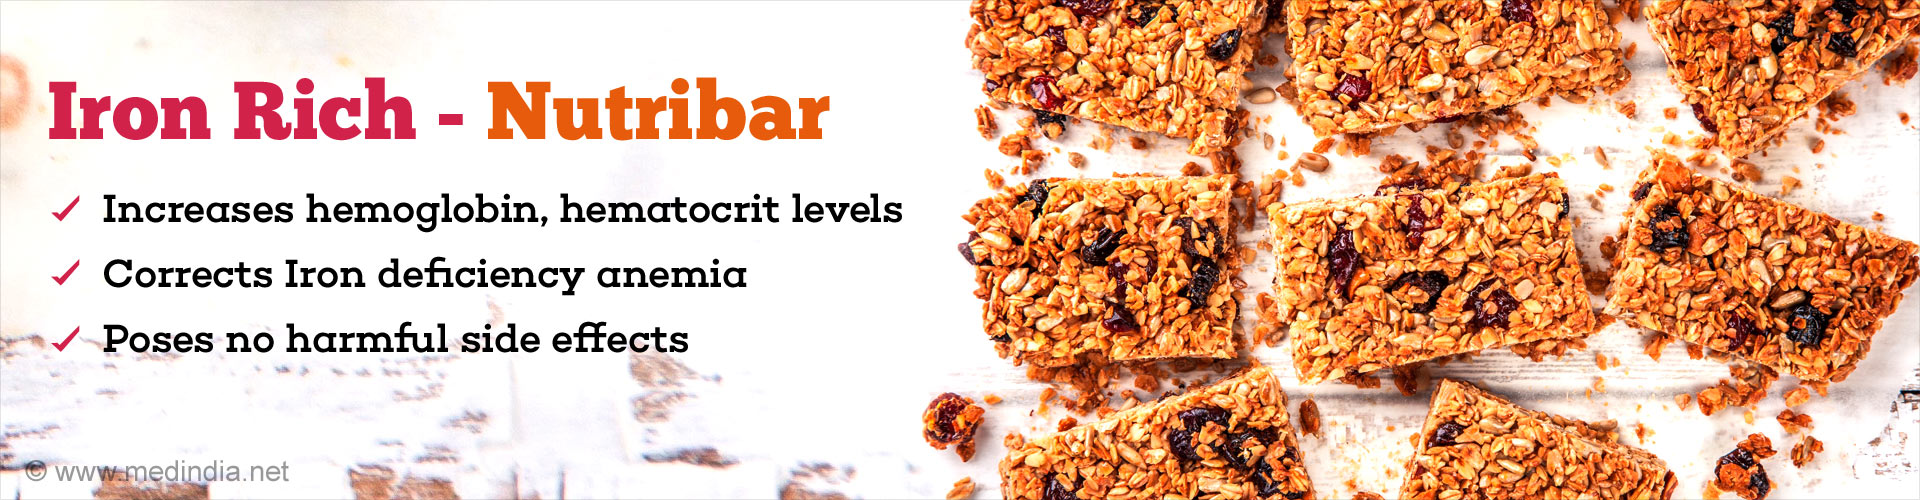 Iron Rich Nutribar
- Increases hemoglobin, hematocrit levels
- Corrects iron deficiency anemia
- Poses no harmful side effects